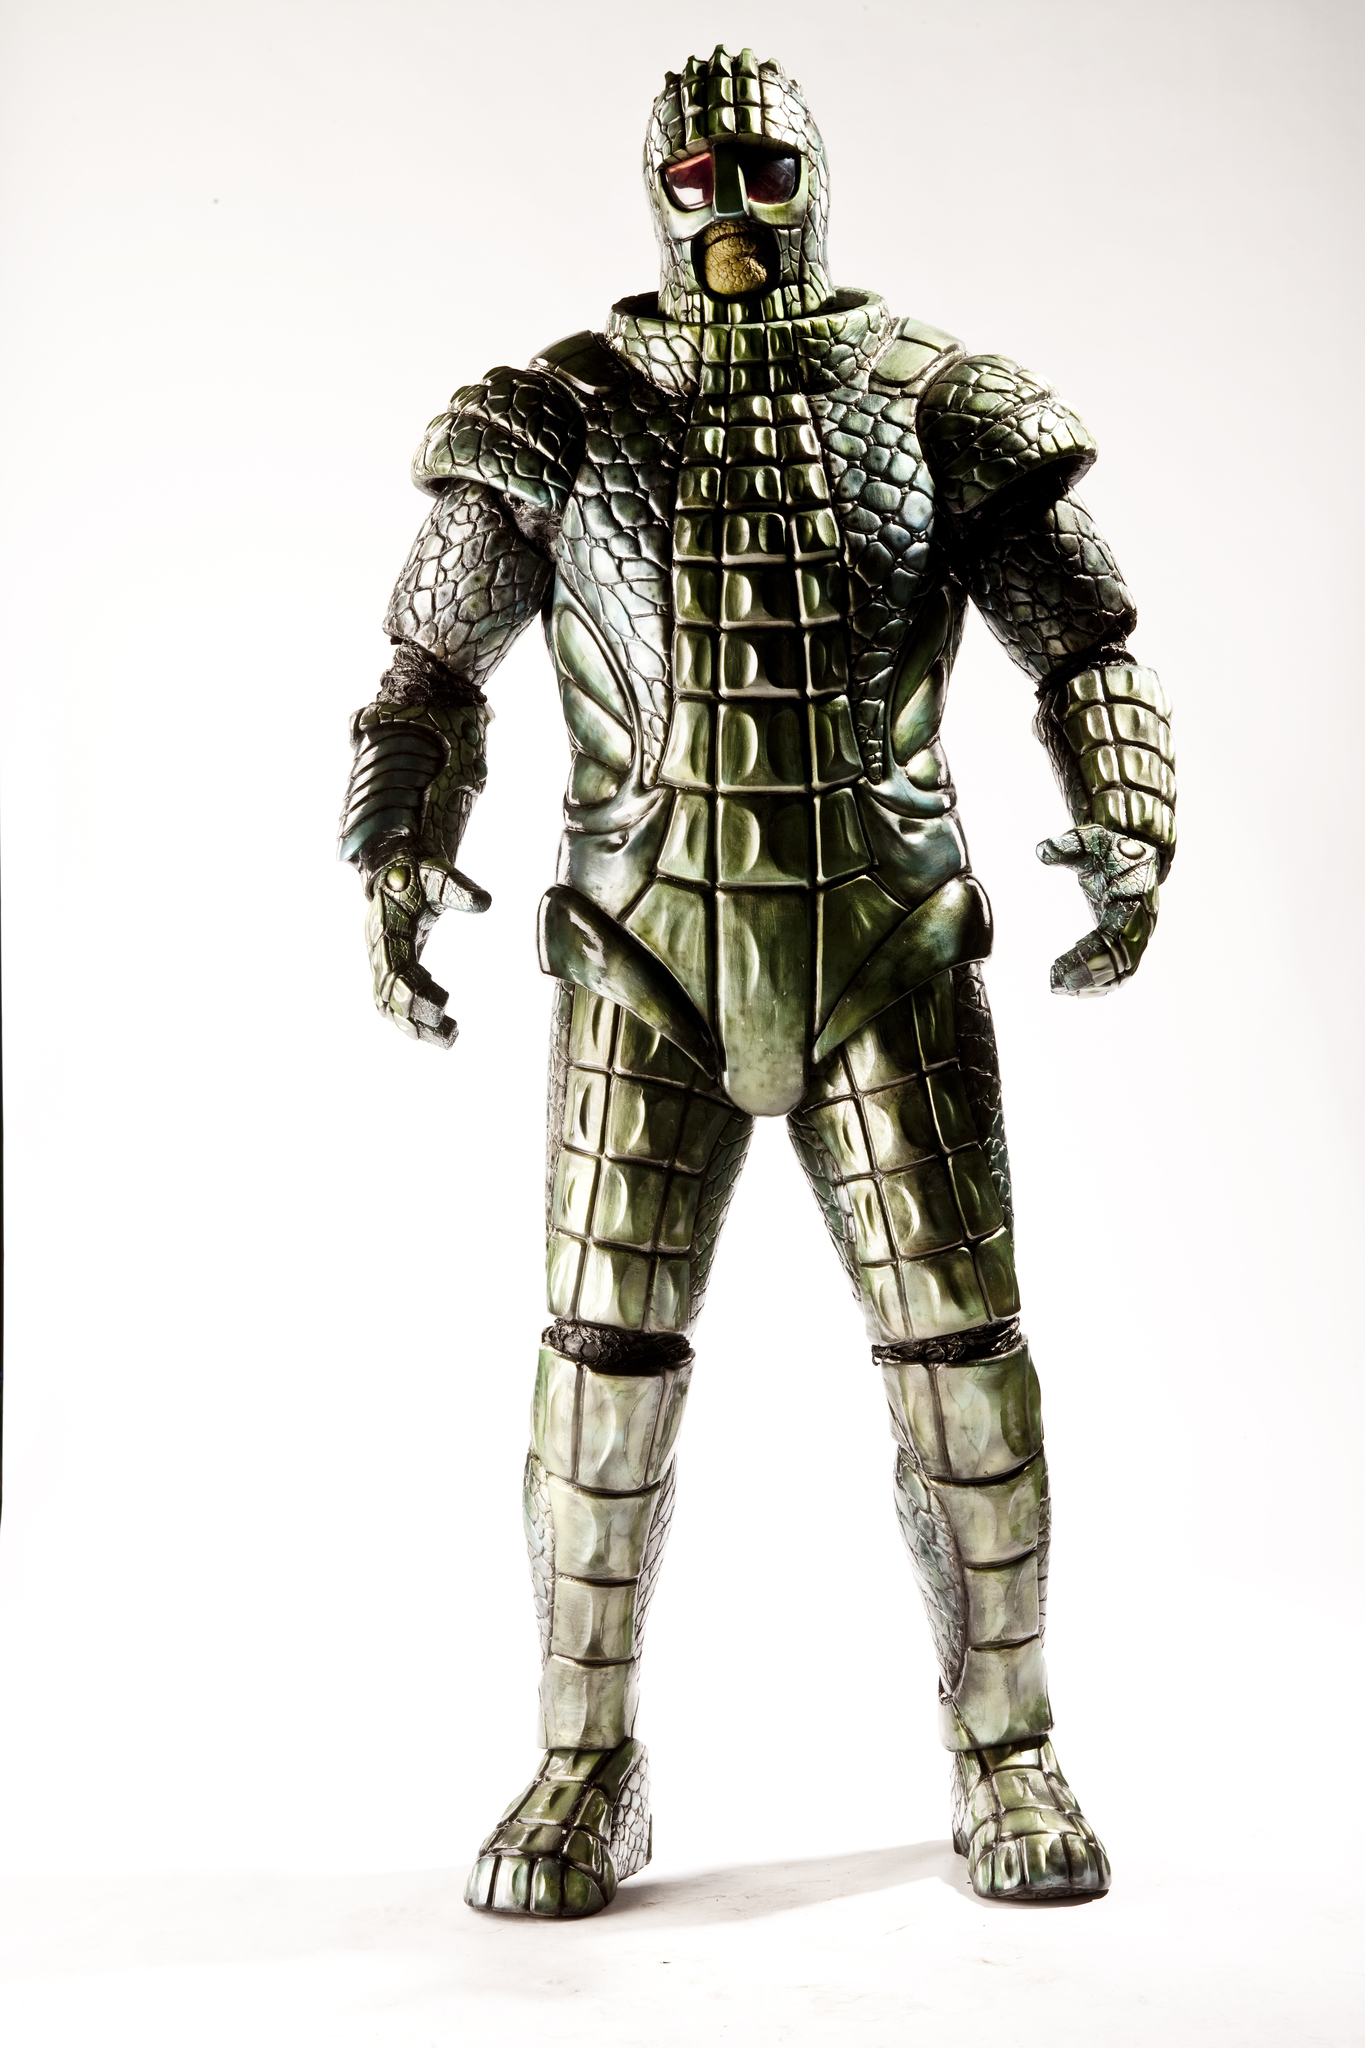 DOCTOR WHO ICE WARRIOR DOCTOR WHO SERIES 7B EPISODE 3